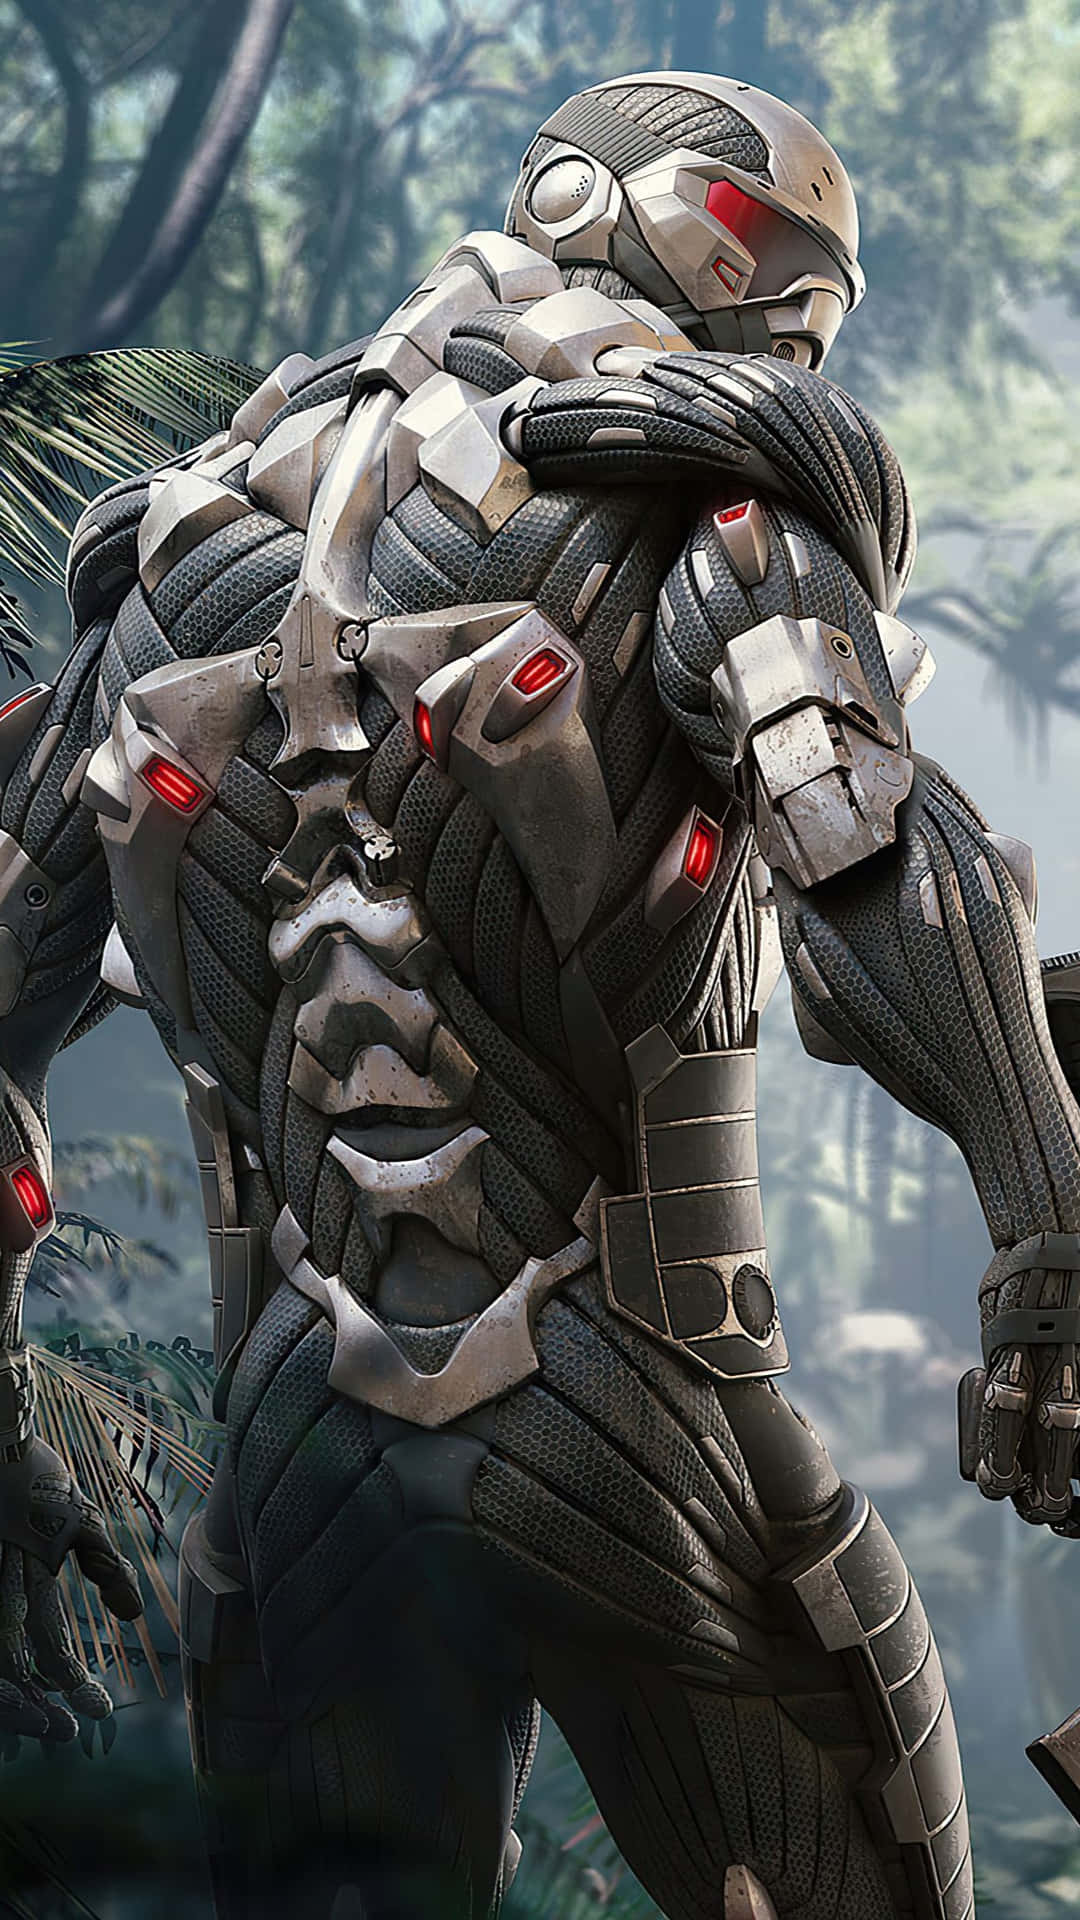 Android players can experience the intense story of Crysis Warhead on their phones.